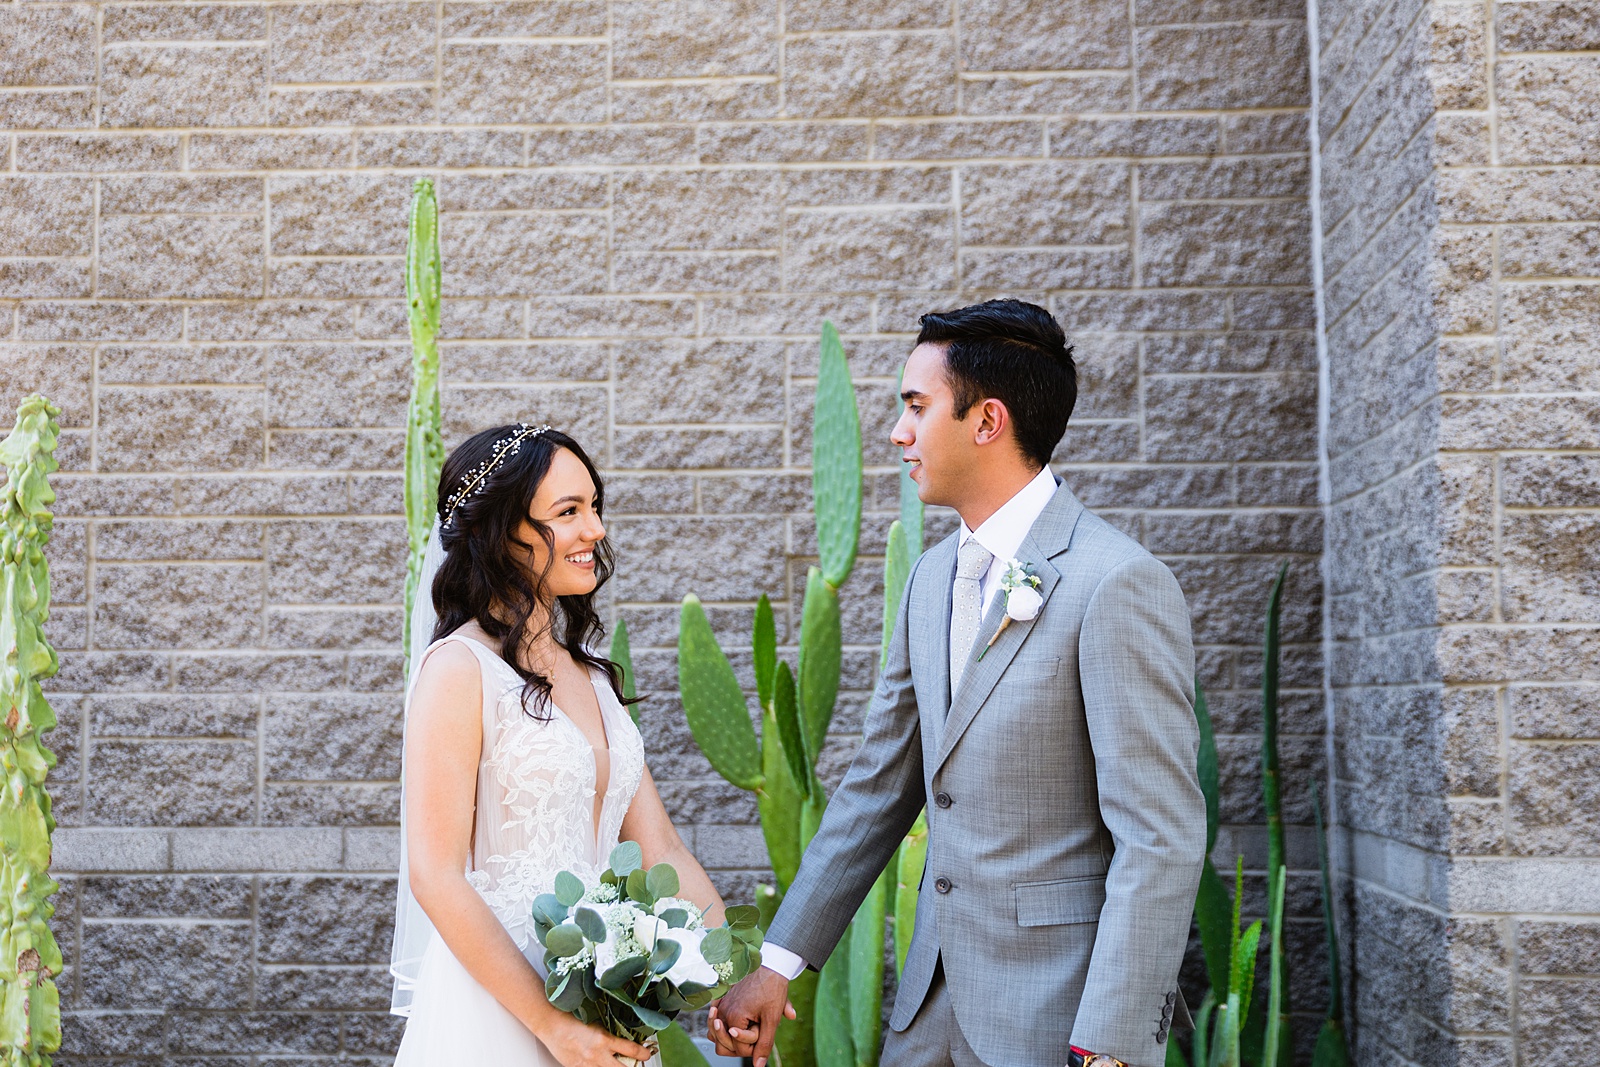 Bride and groom's first look at Hyatt Regency Scottsdale Resort & Spa At Gainey Ranch by Phoenix wedding photographer PMA Photography.